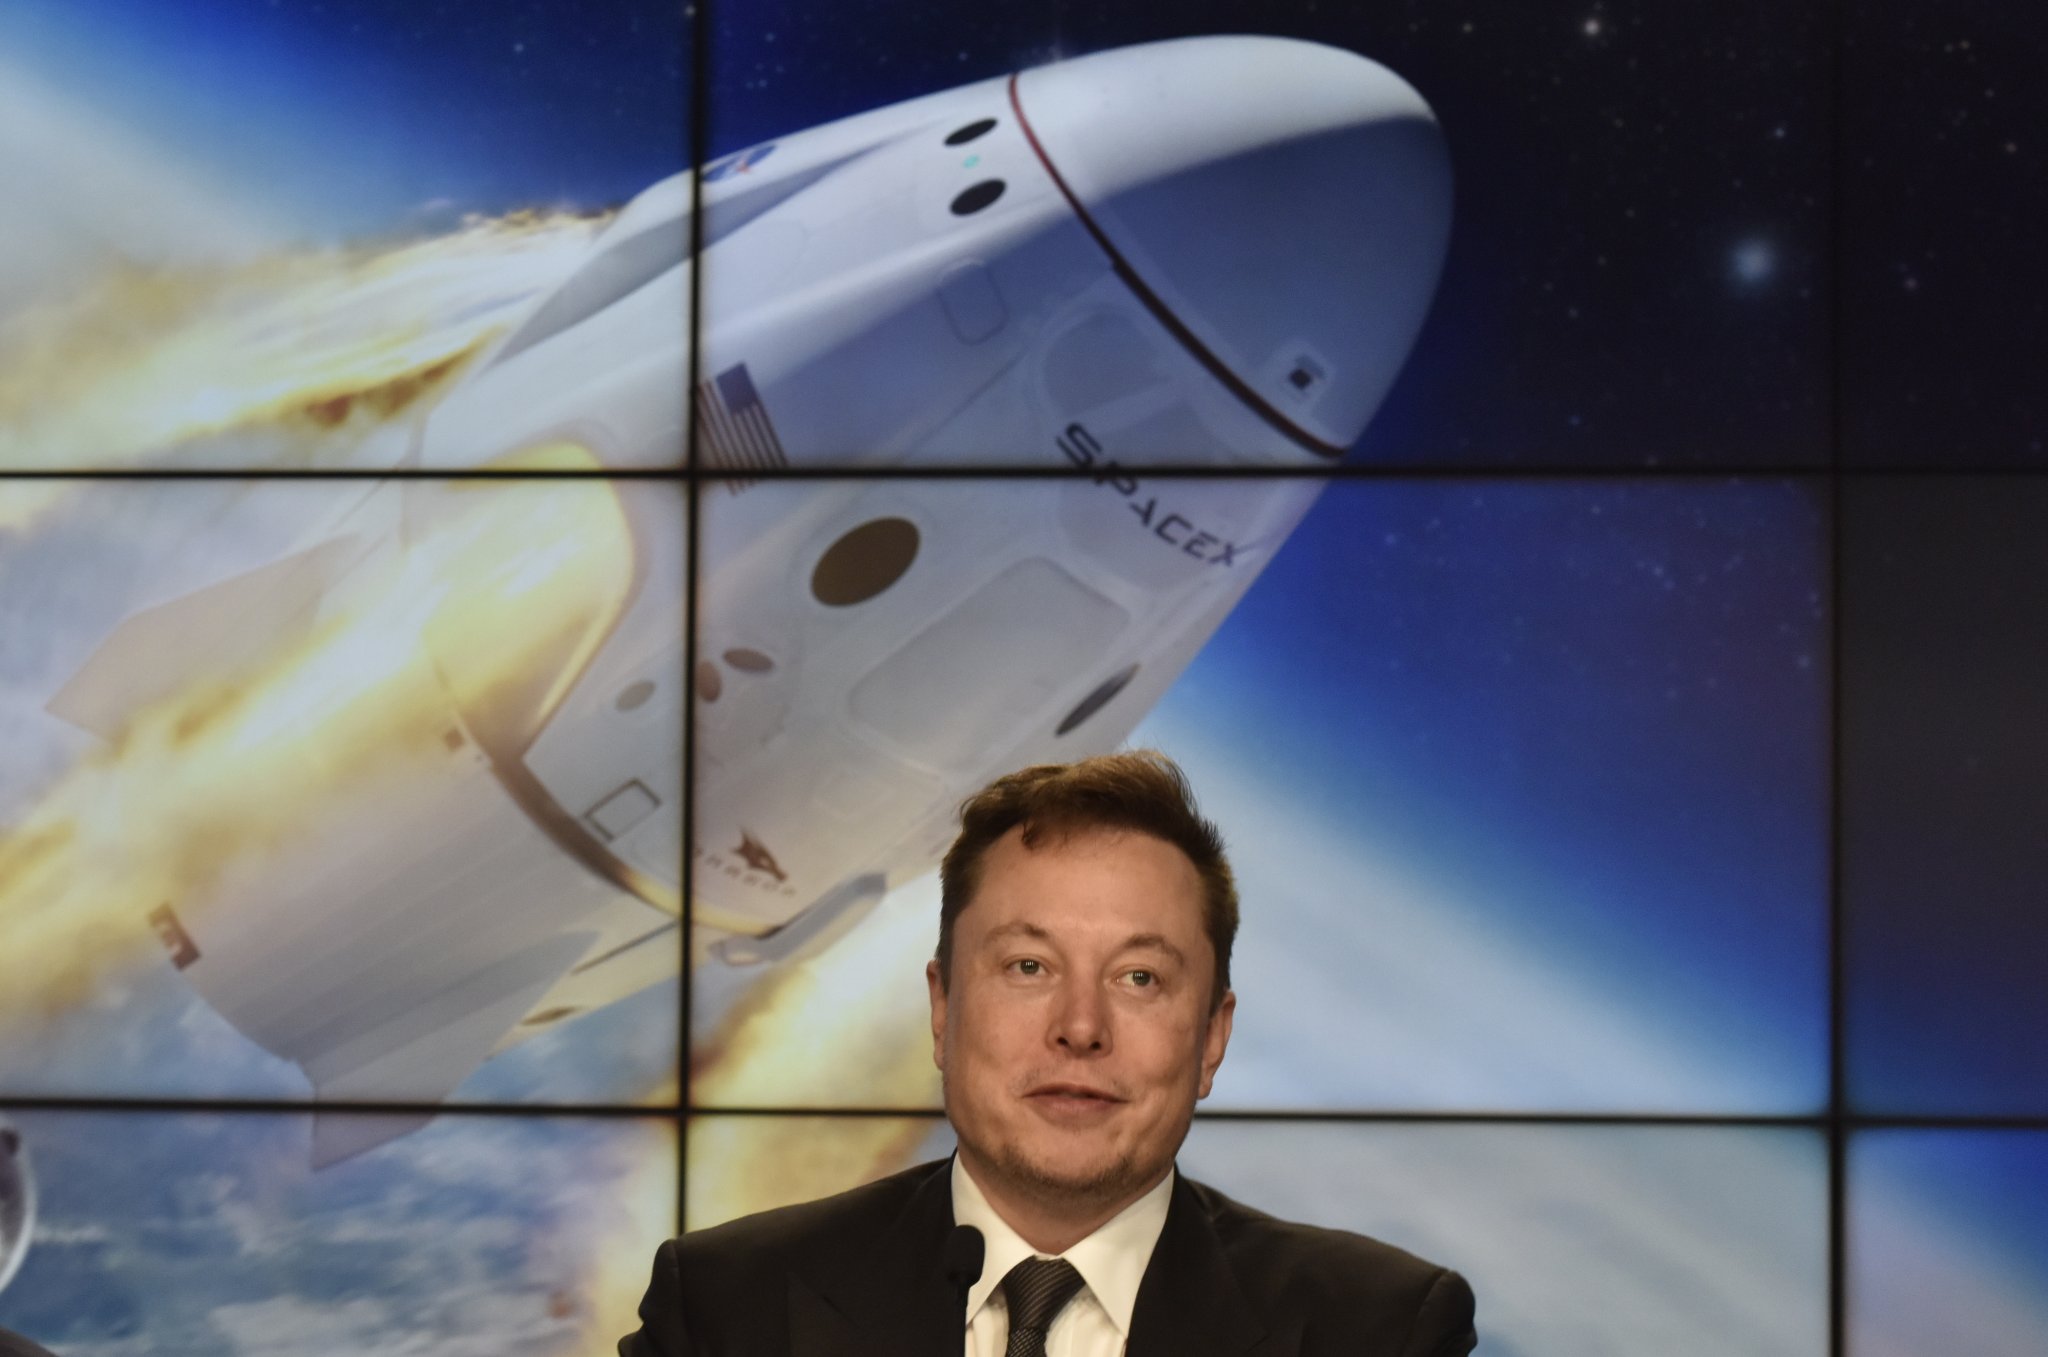 Musk's SpaceX pegs initial Starlink internet price at $99 per month: email